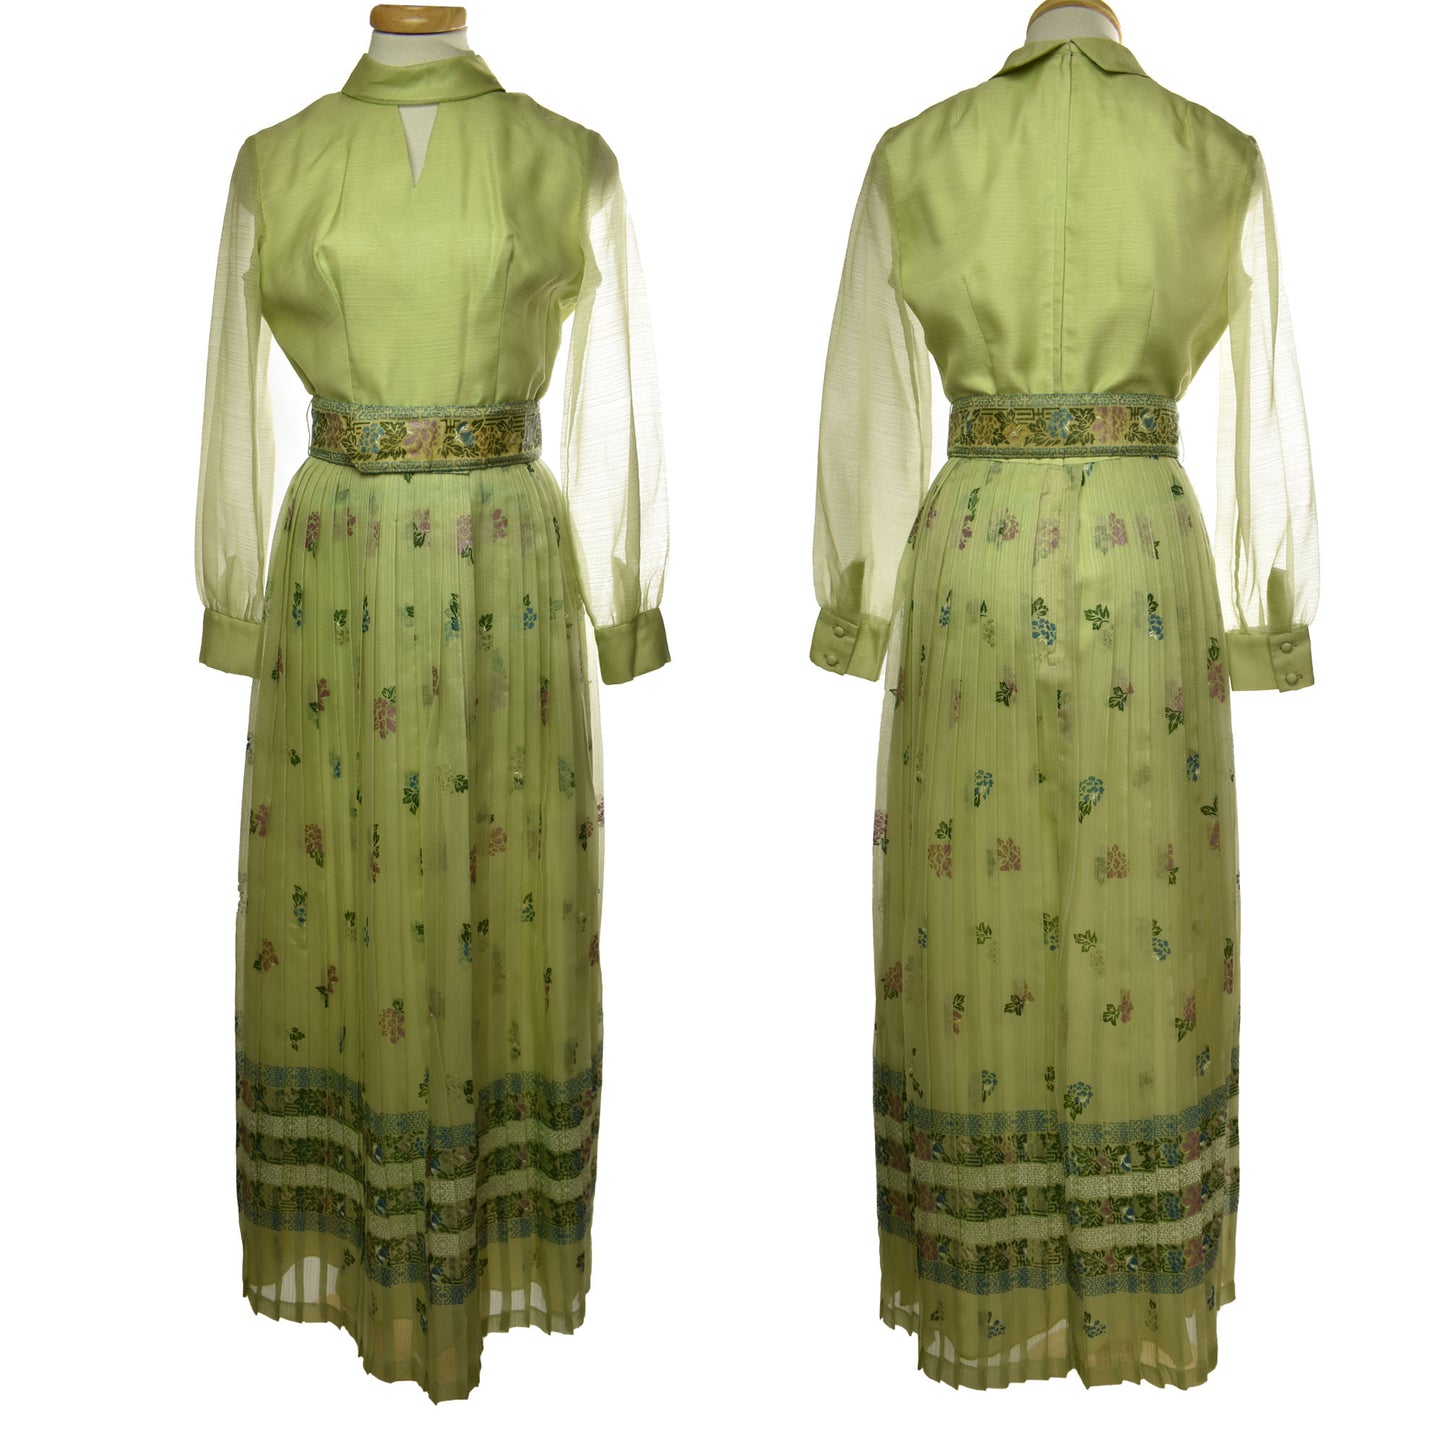 Vintage 60's/70ss Alfred Shaheen Lime Green Hawaiian Velted Screen Floral Print Pleated Dress Made in USA Size 10